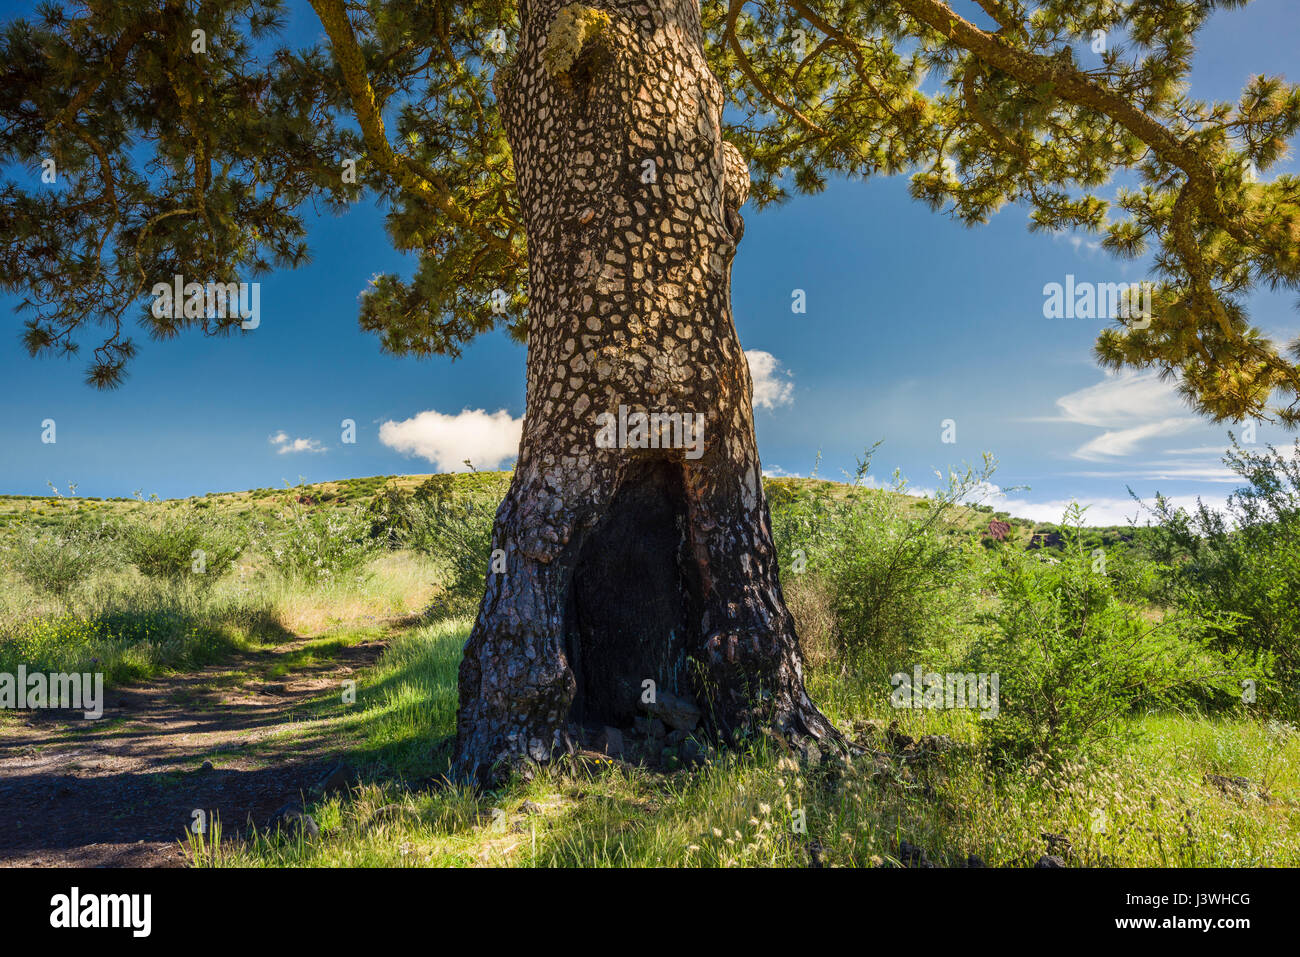 Large hollow Canarian pine tree (Pinus canariensis) which has been badly burnt and recovered near San Jose de los Llanos, Tenerife, Canary Islands Stock Photo